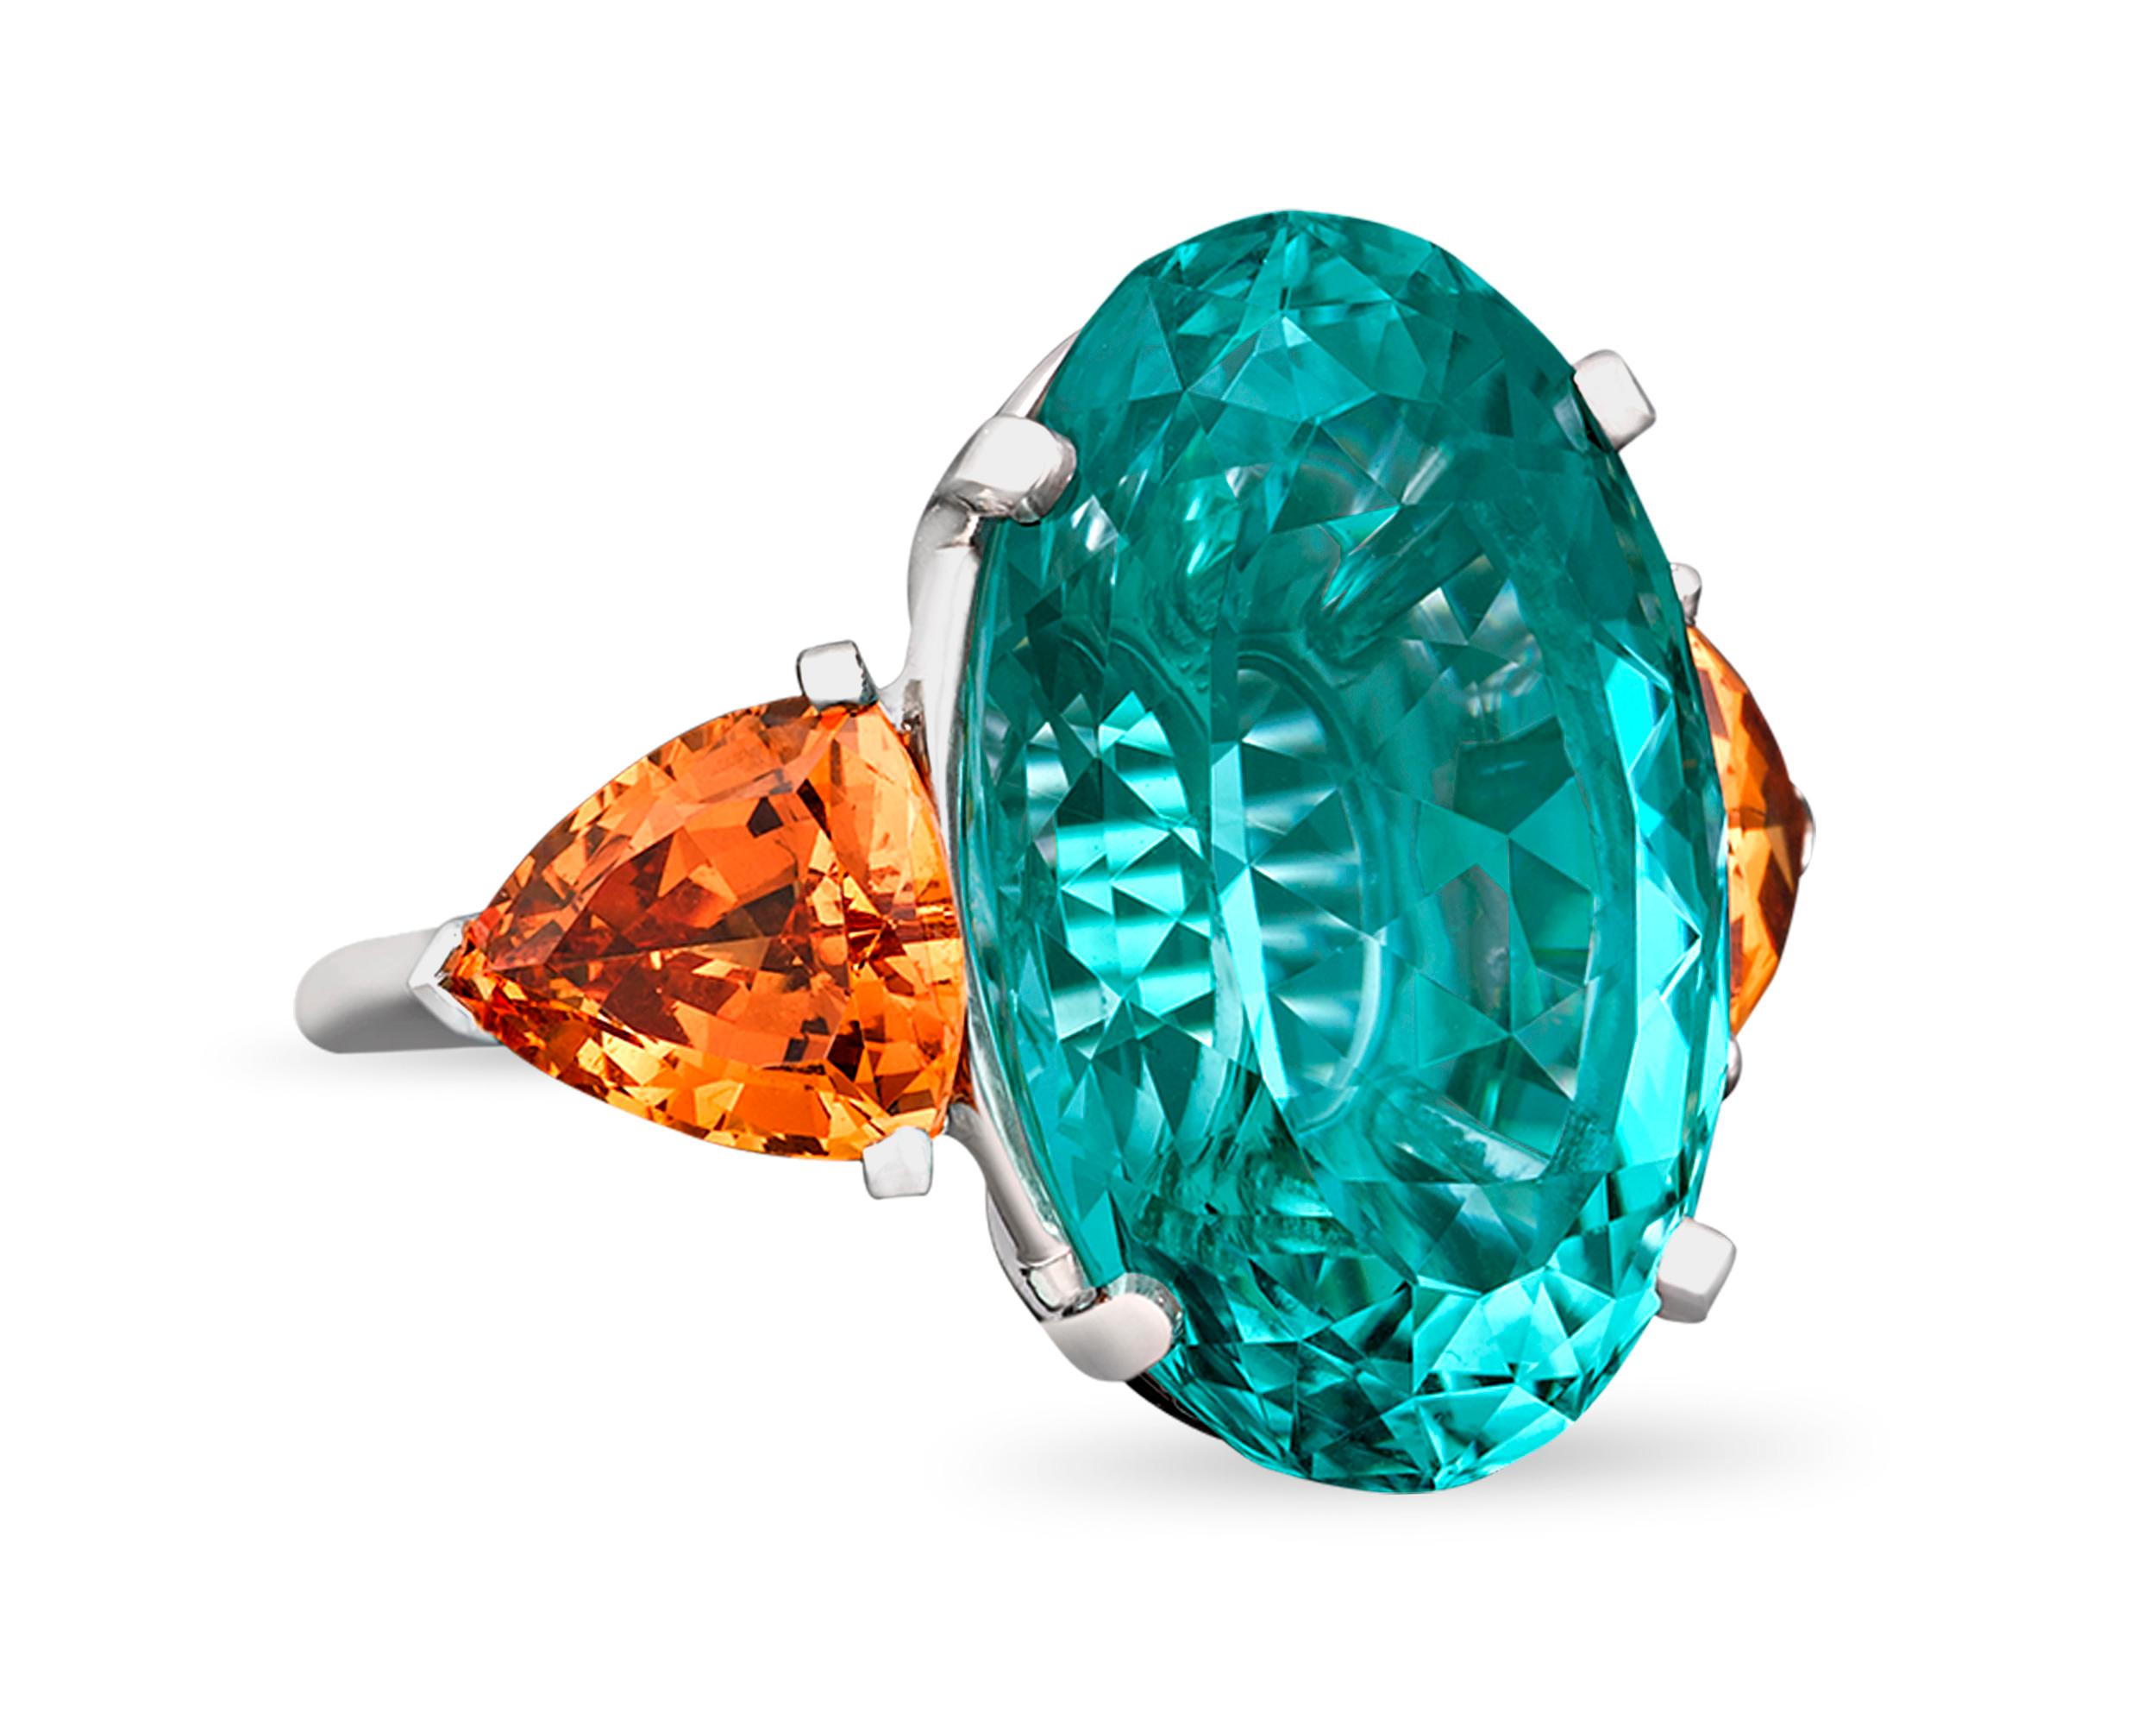 A pair of rare trillion-cut mandarin garnets weighing approximately 5.38 carats and a monumental 22.81-carat oval-cut Paraiba tourmaline make a daring statement in this ring. The fiery orange of the garnet provides an eye-catching contrast to the